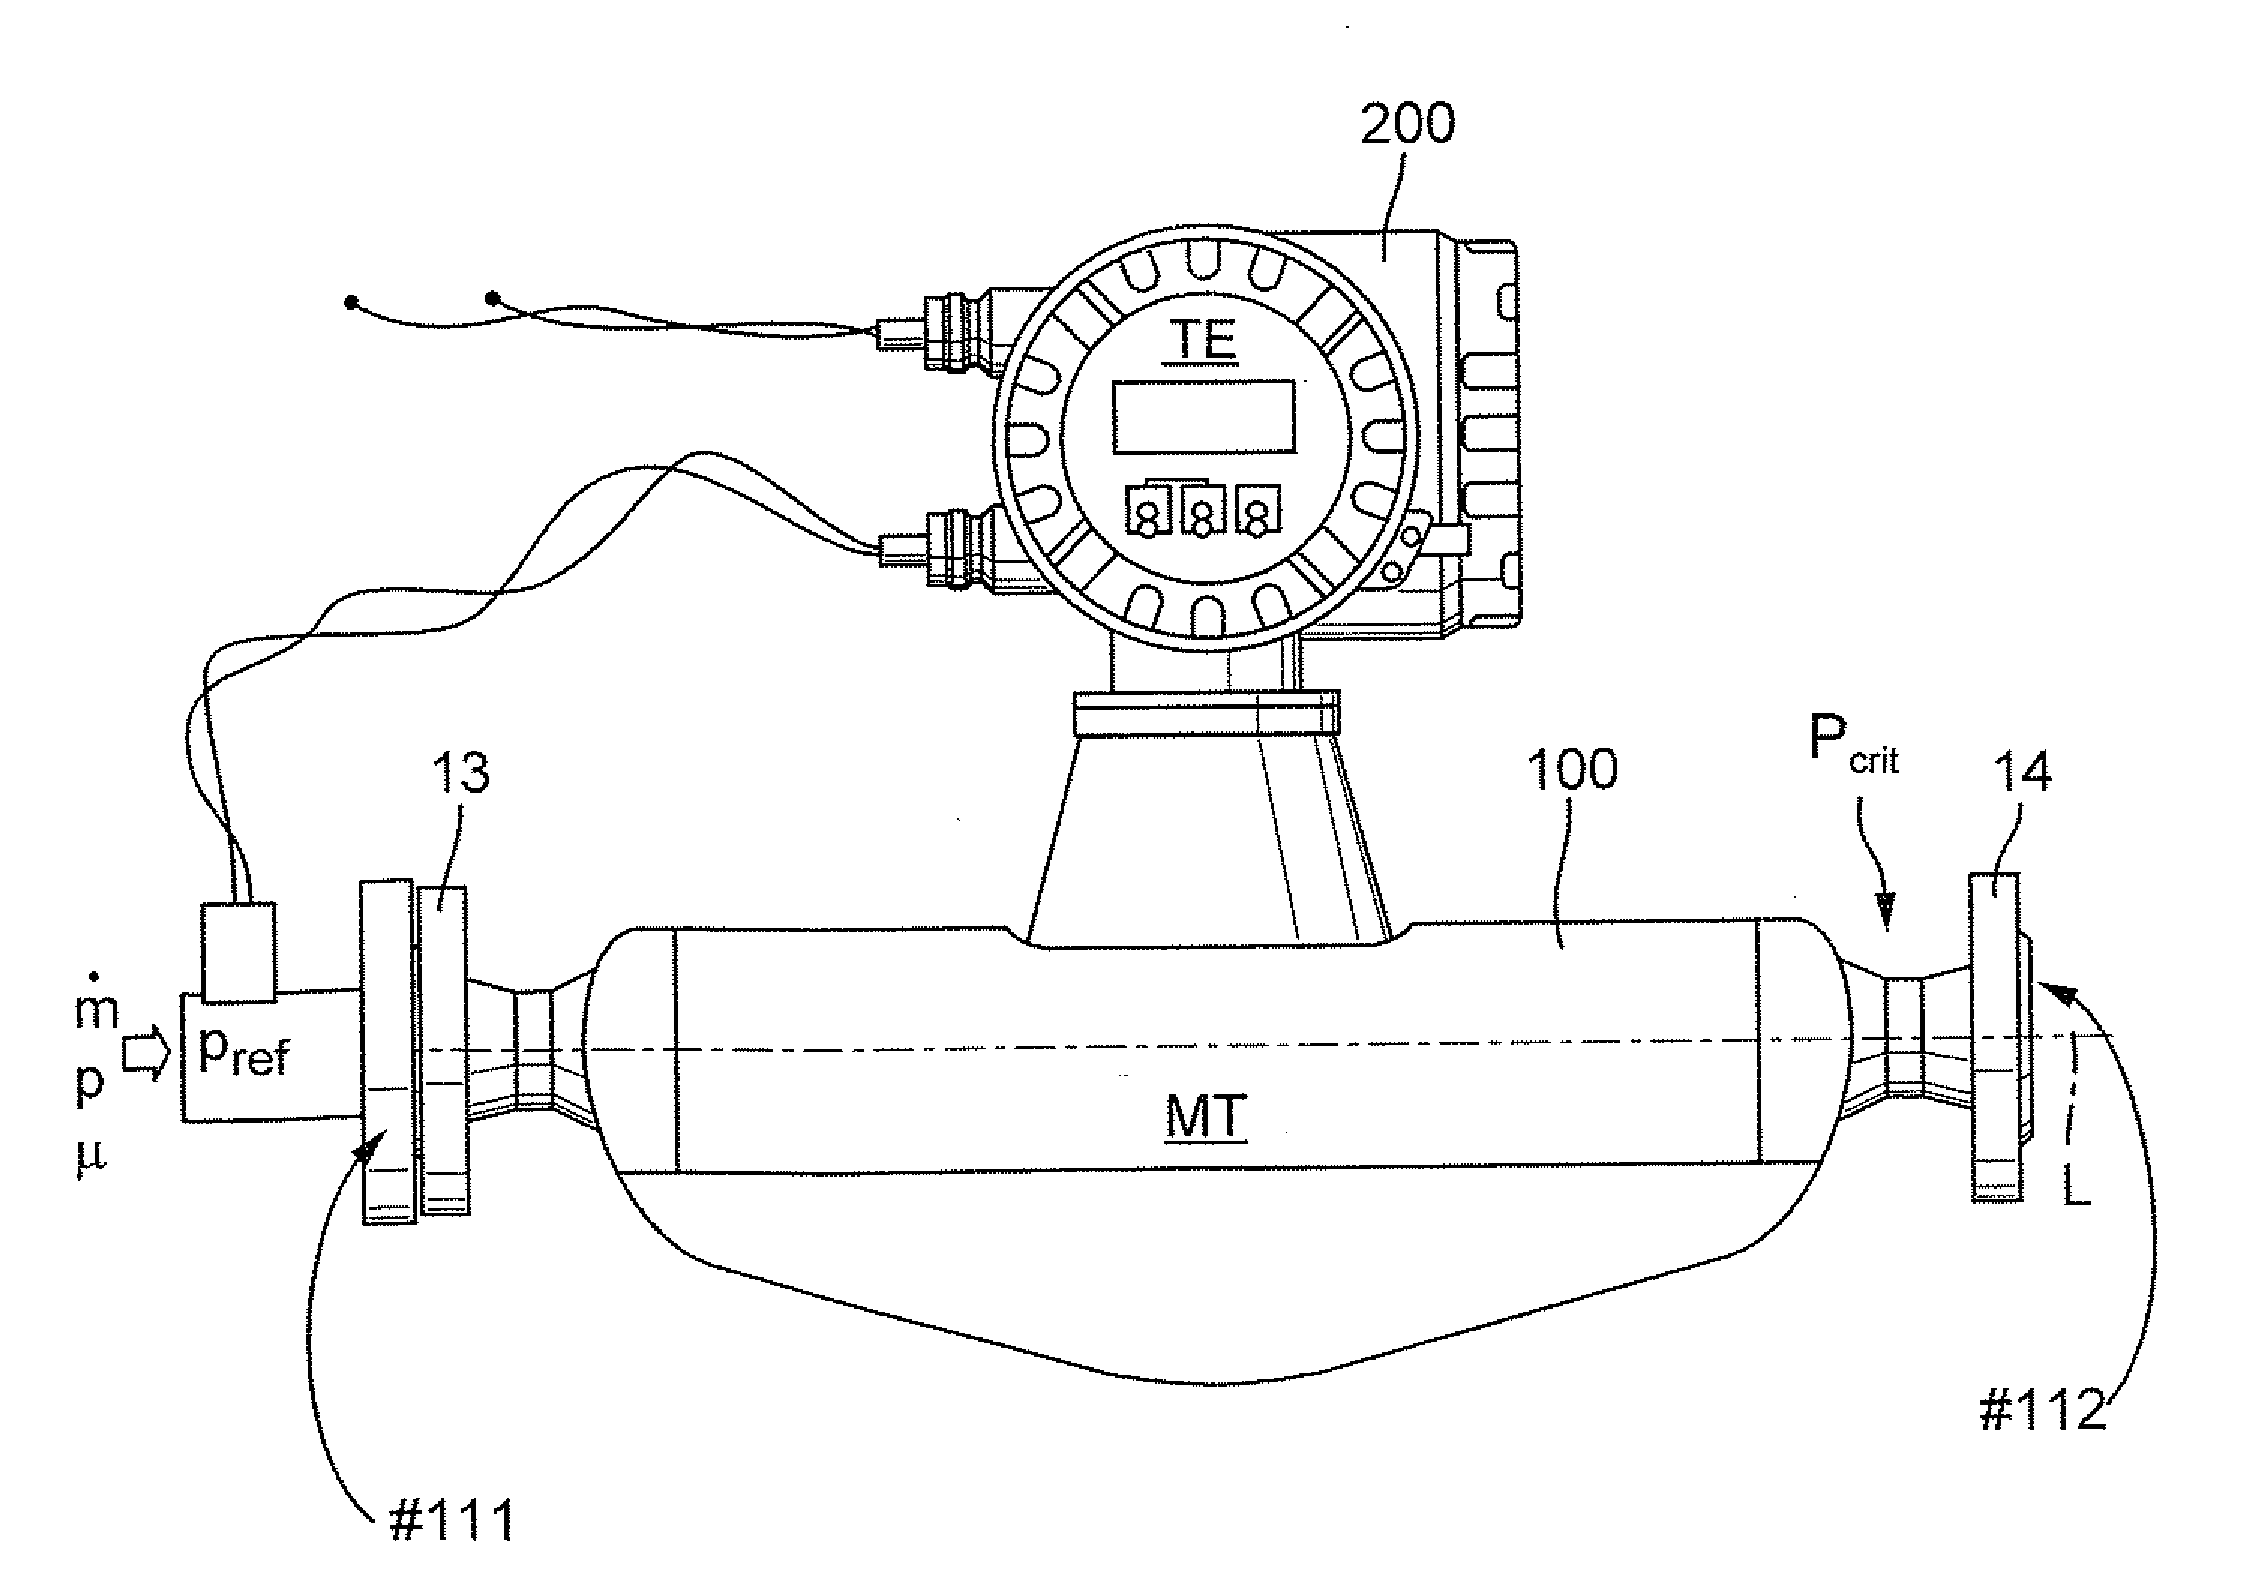 Measuring system having a measuring transducer of vibration-type